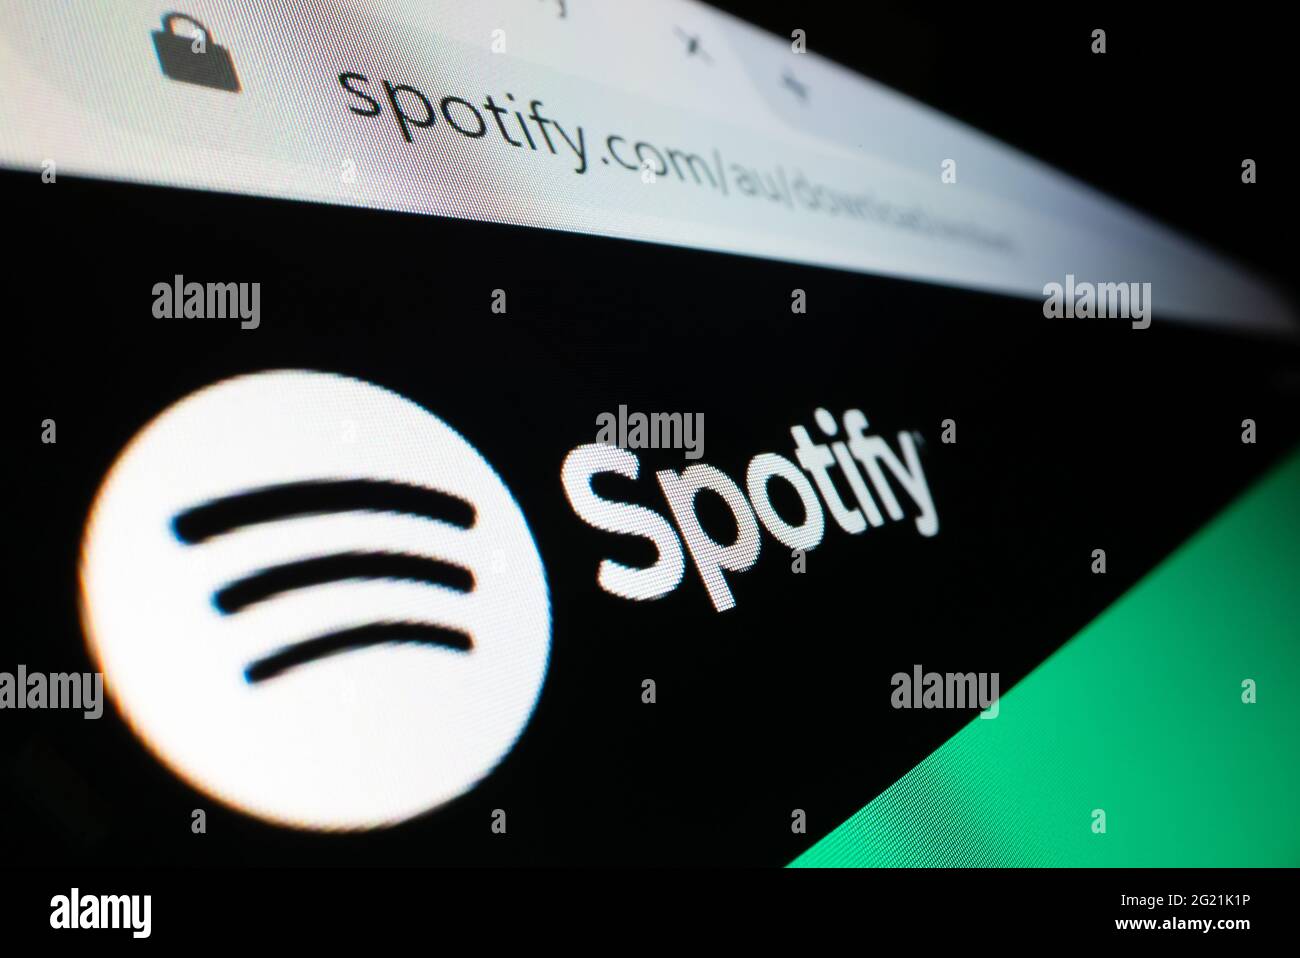 Close-up view of Spotify logo on its website Stock Photo